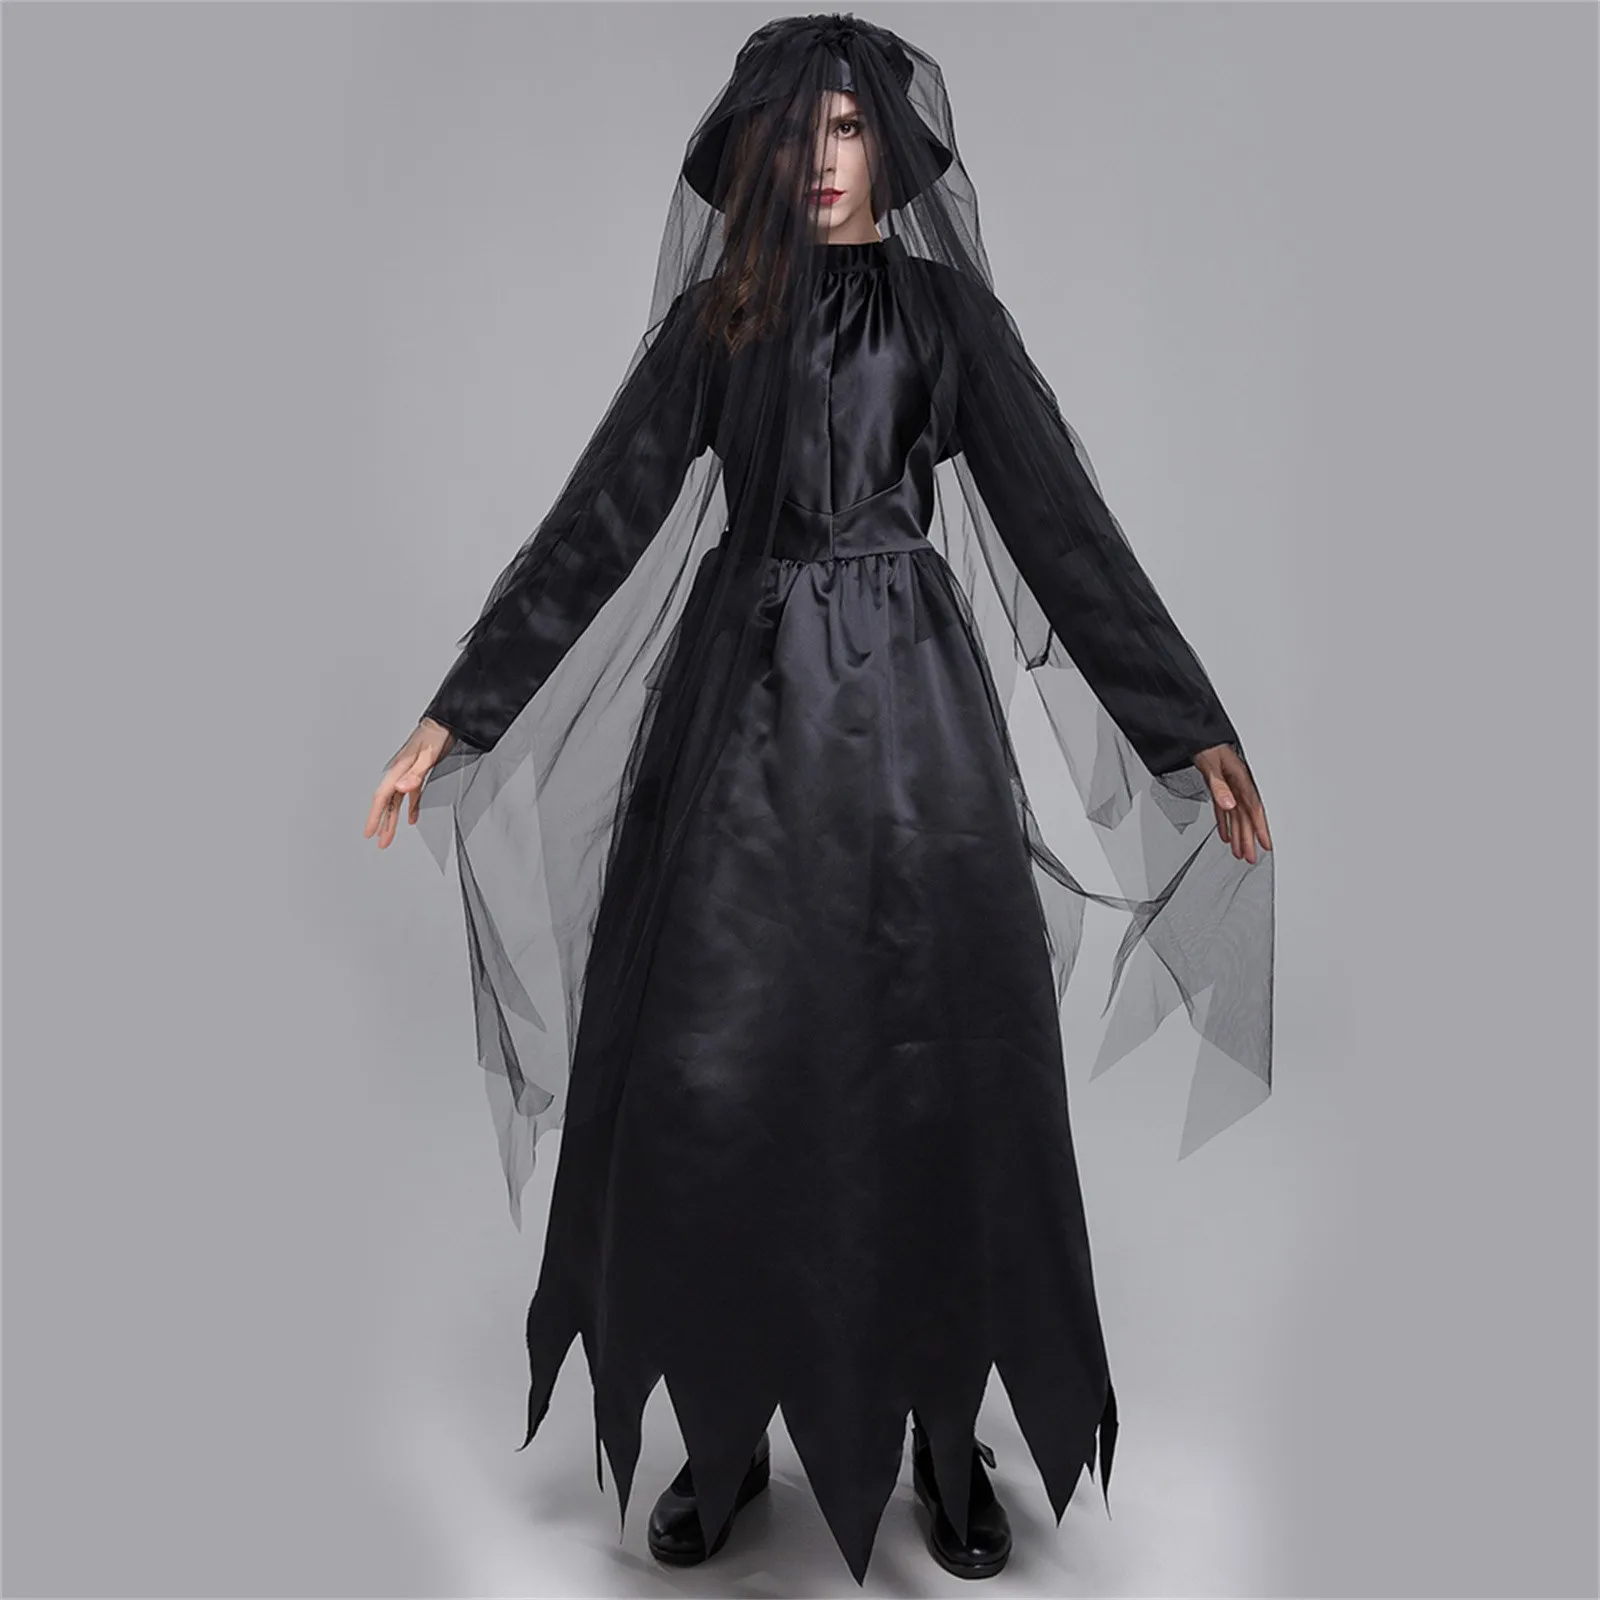 

Witch Women Scary Zombie Vampire Halloween Costume Horror Spooky Ghost Sexy Dress+Colak Medieval Hooded Cape Day Of The Dead